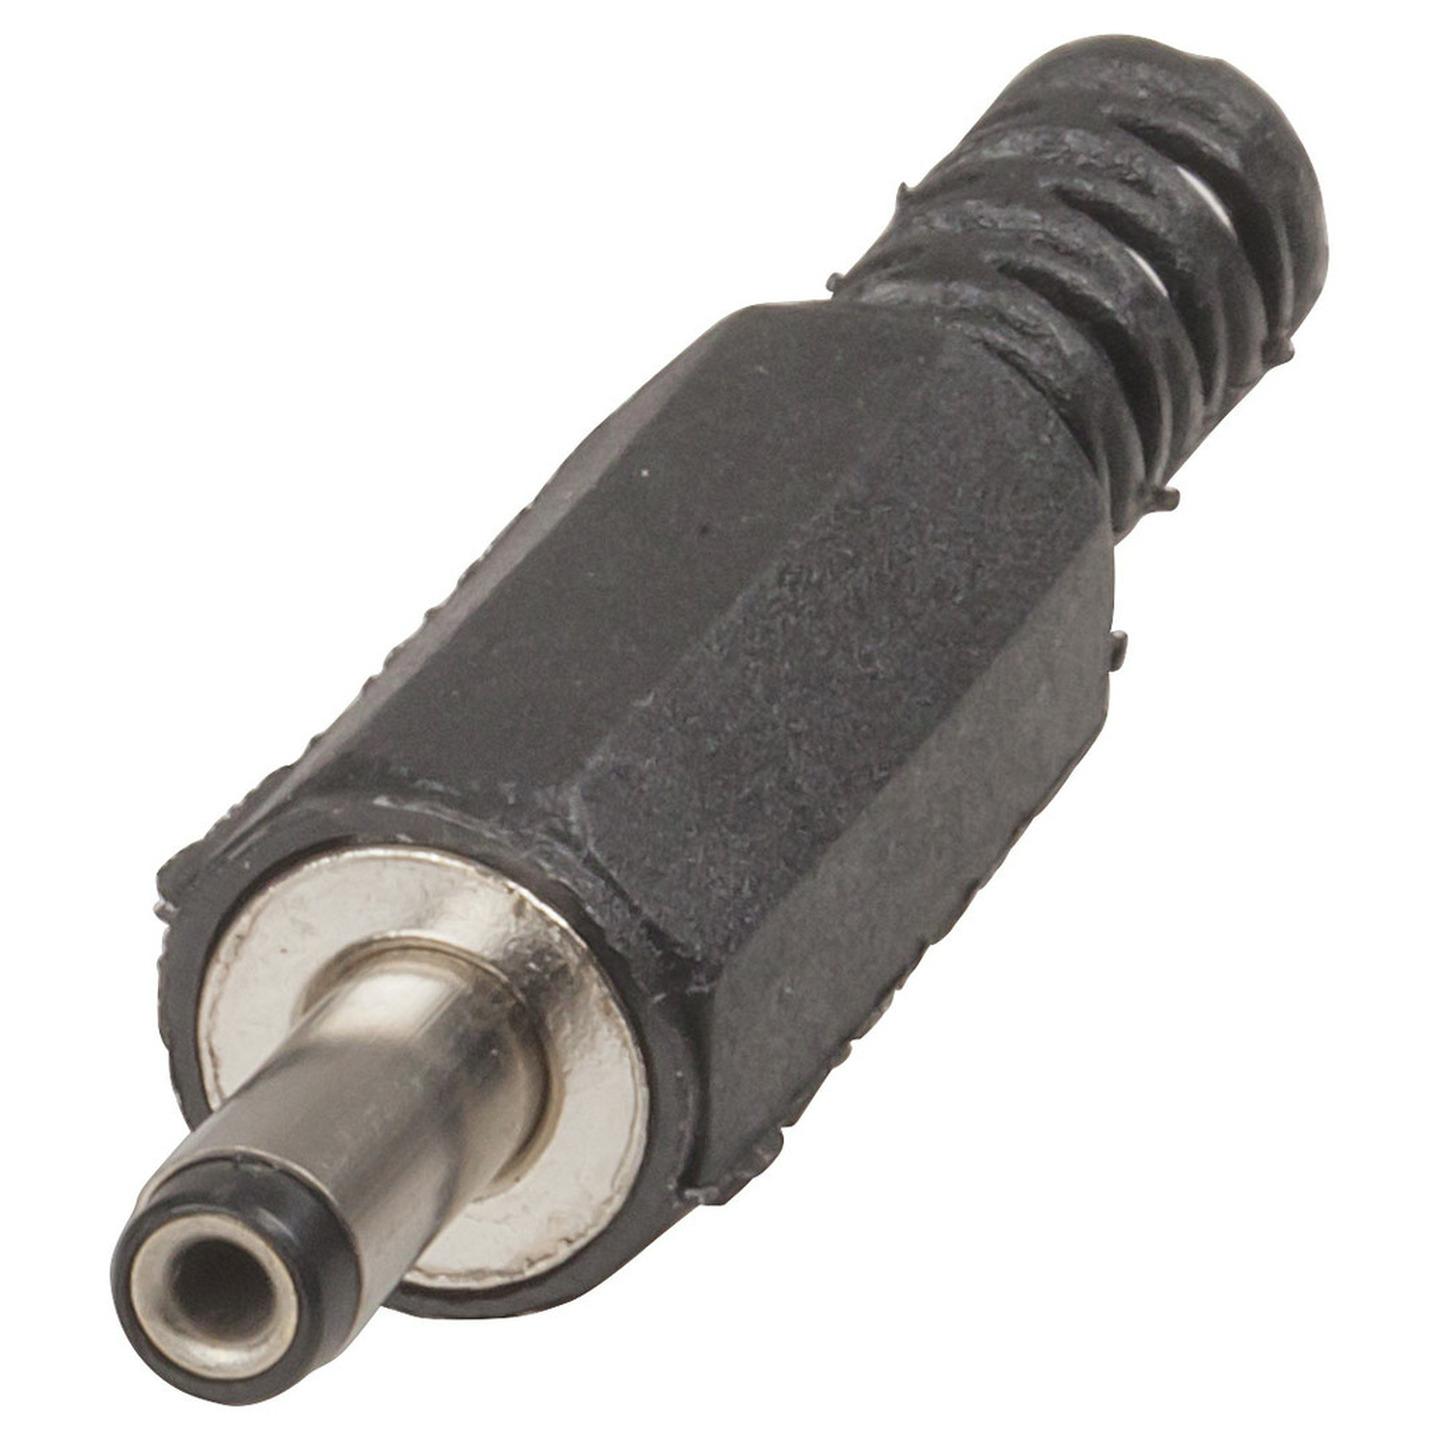 1.7mm DC Power Line Connector